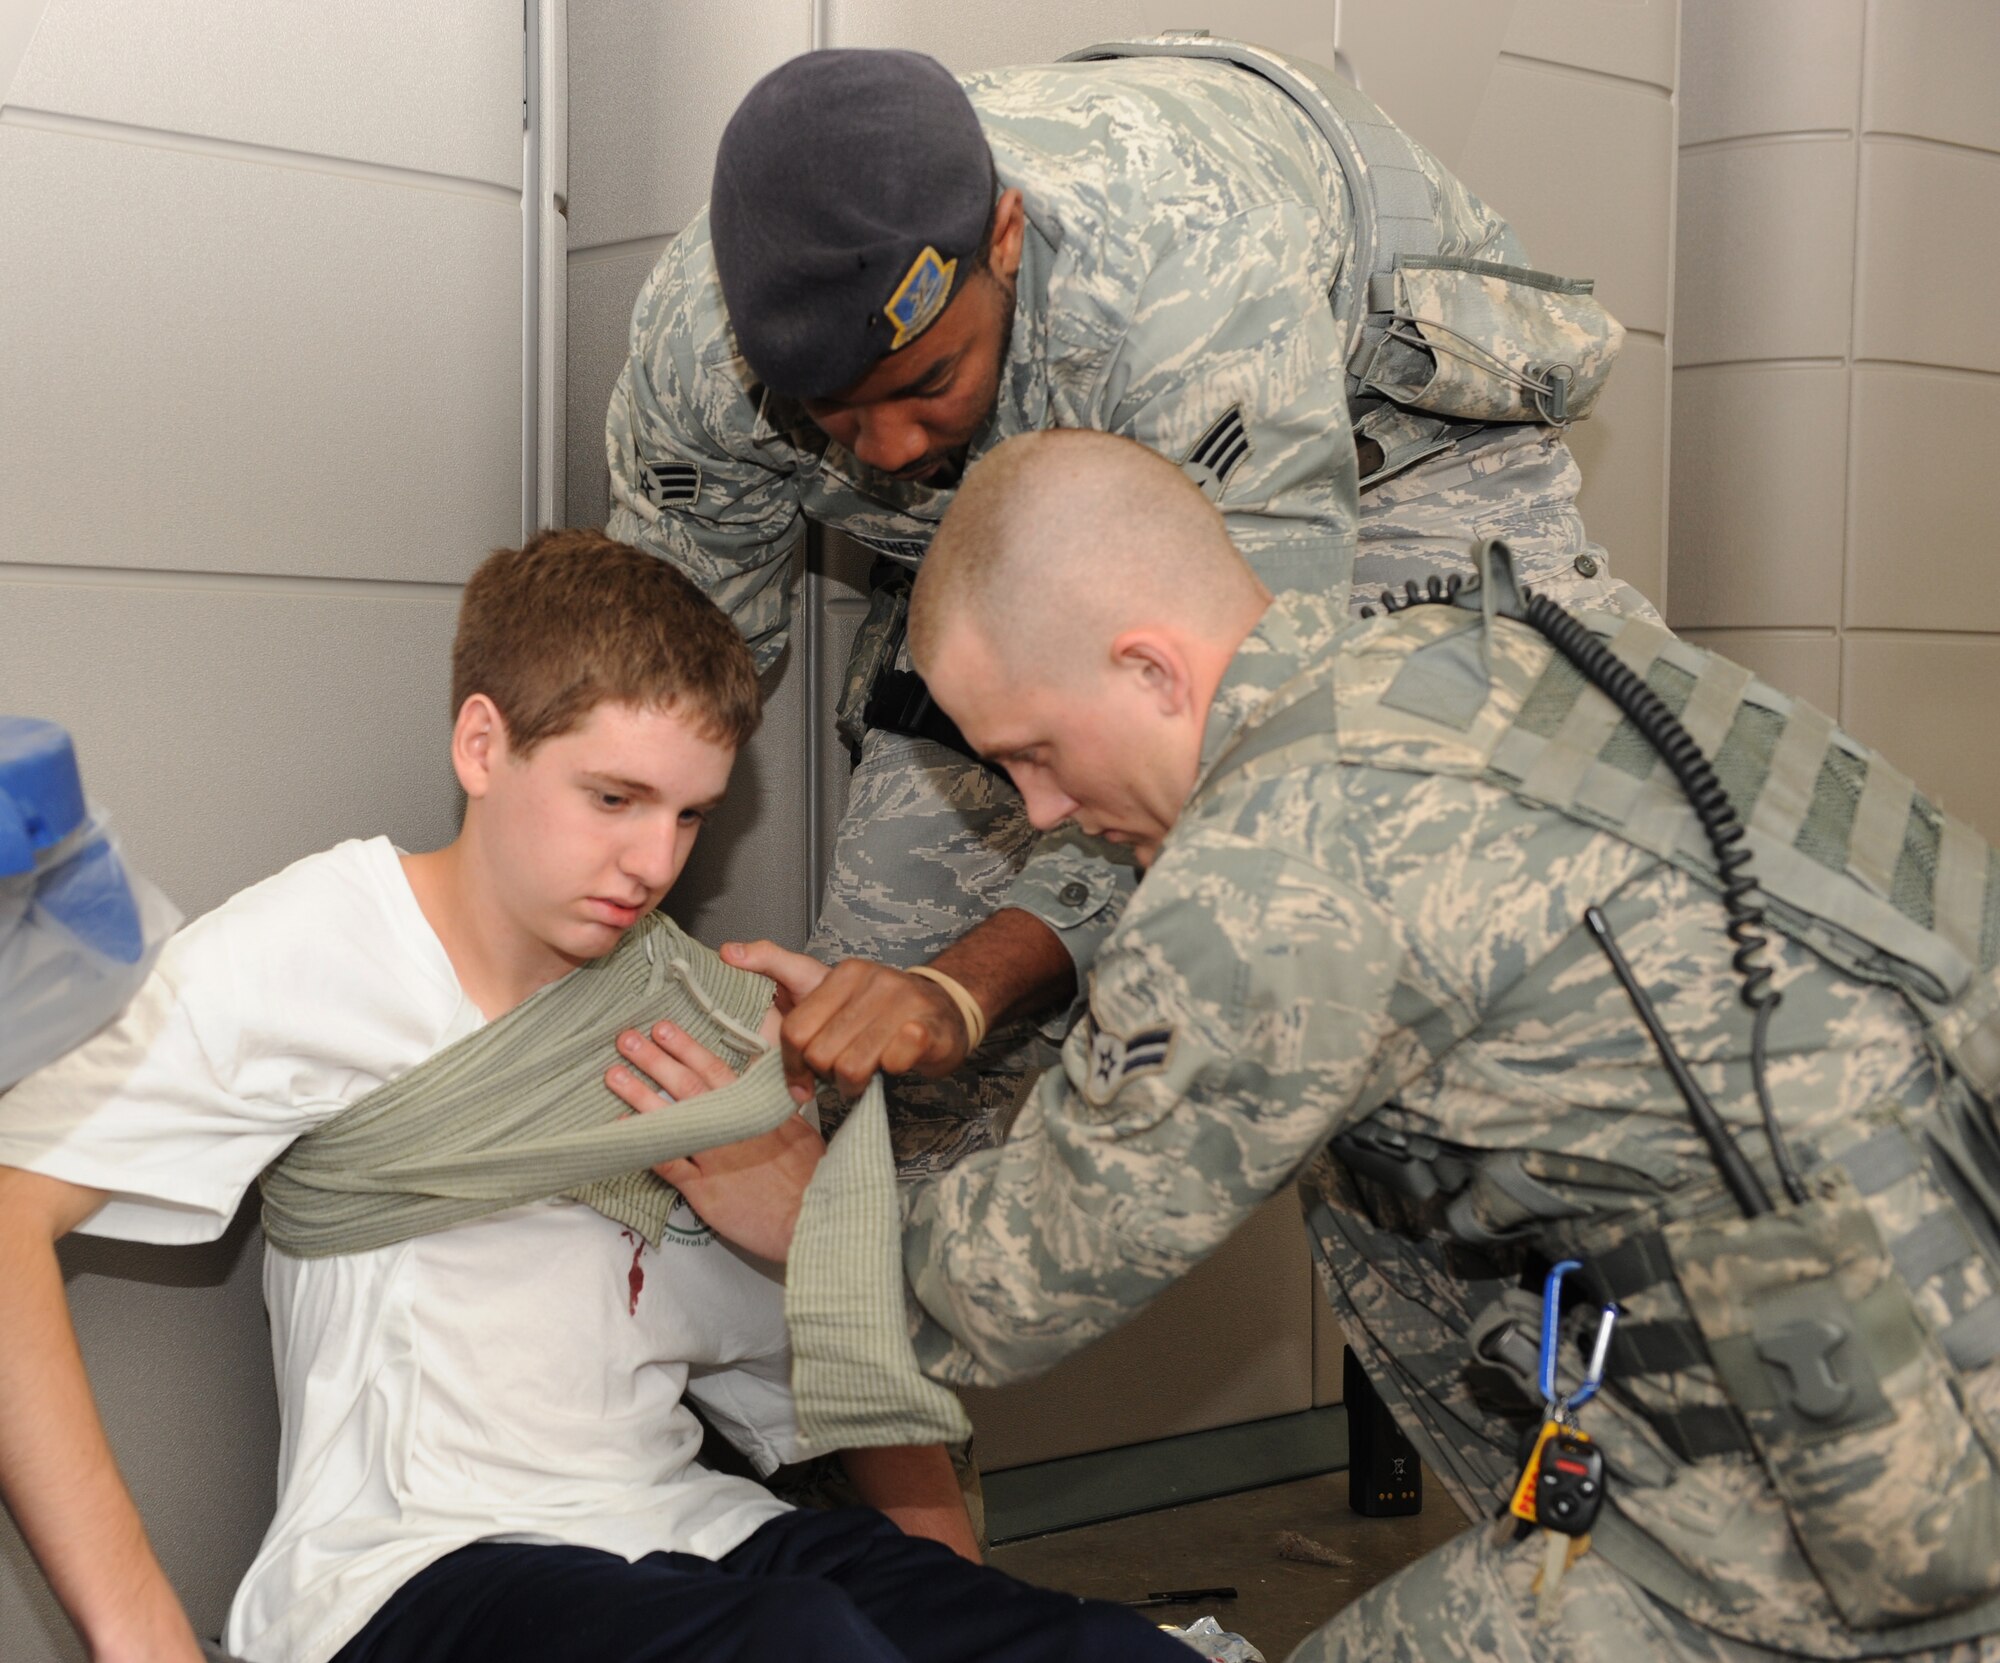 Senior Airman Miguel Merriweather (center) and Airman 1st Class Jaren Bishop, both 19th Security Forces Squadron patrolmen, help an injured victim during a major accident response exercise April 12, 2011, at Little Rock Air Force Base, Ark. The MARE enabled Airmen to practice procedures for the upcoming operation readiness inspection in October. (U. S. Air Force photo by Airman 1st Class Ellora Stewart)